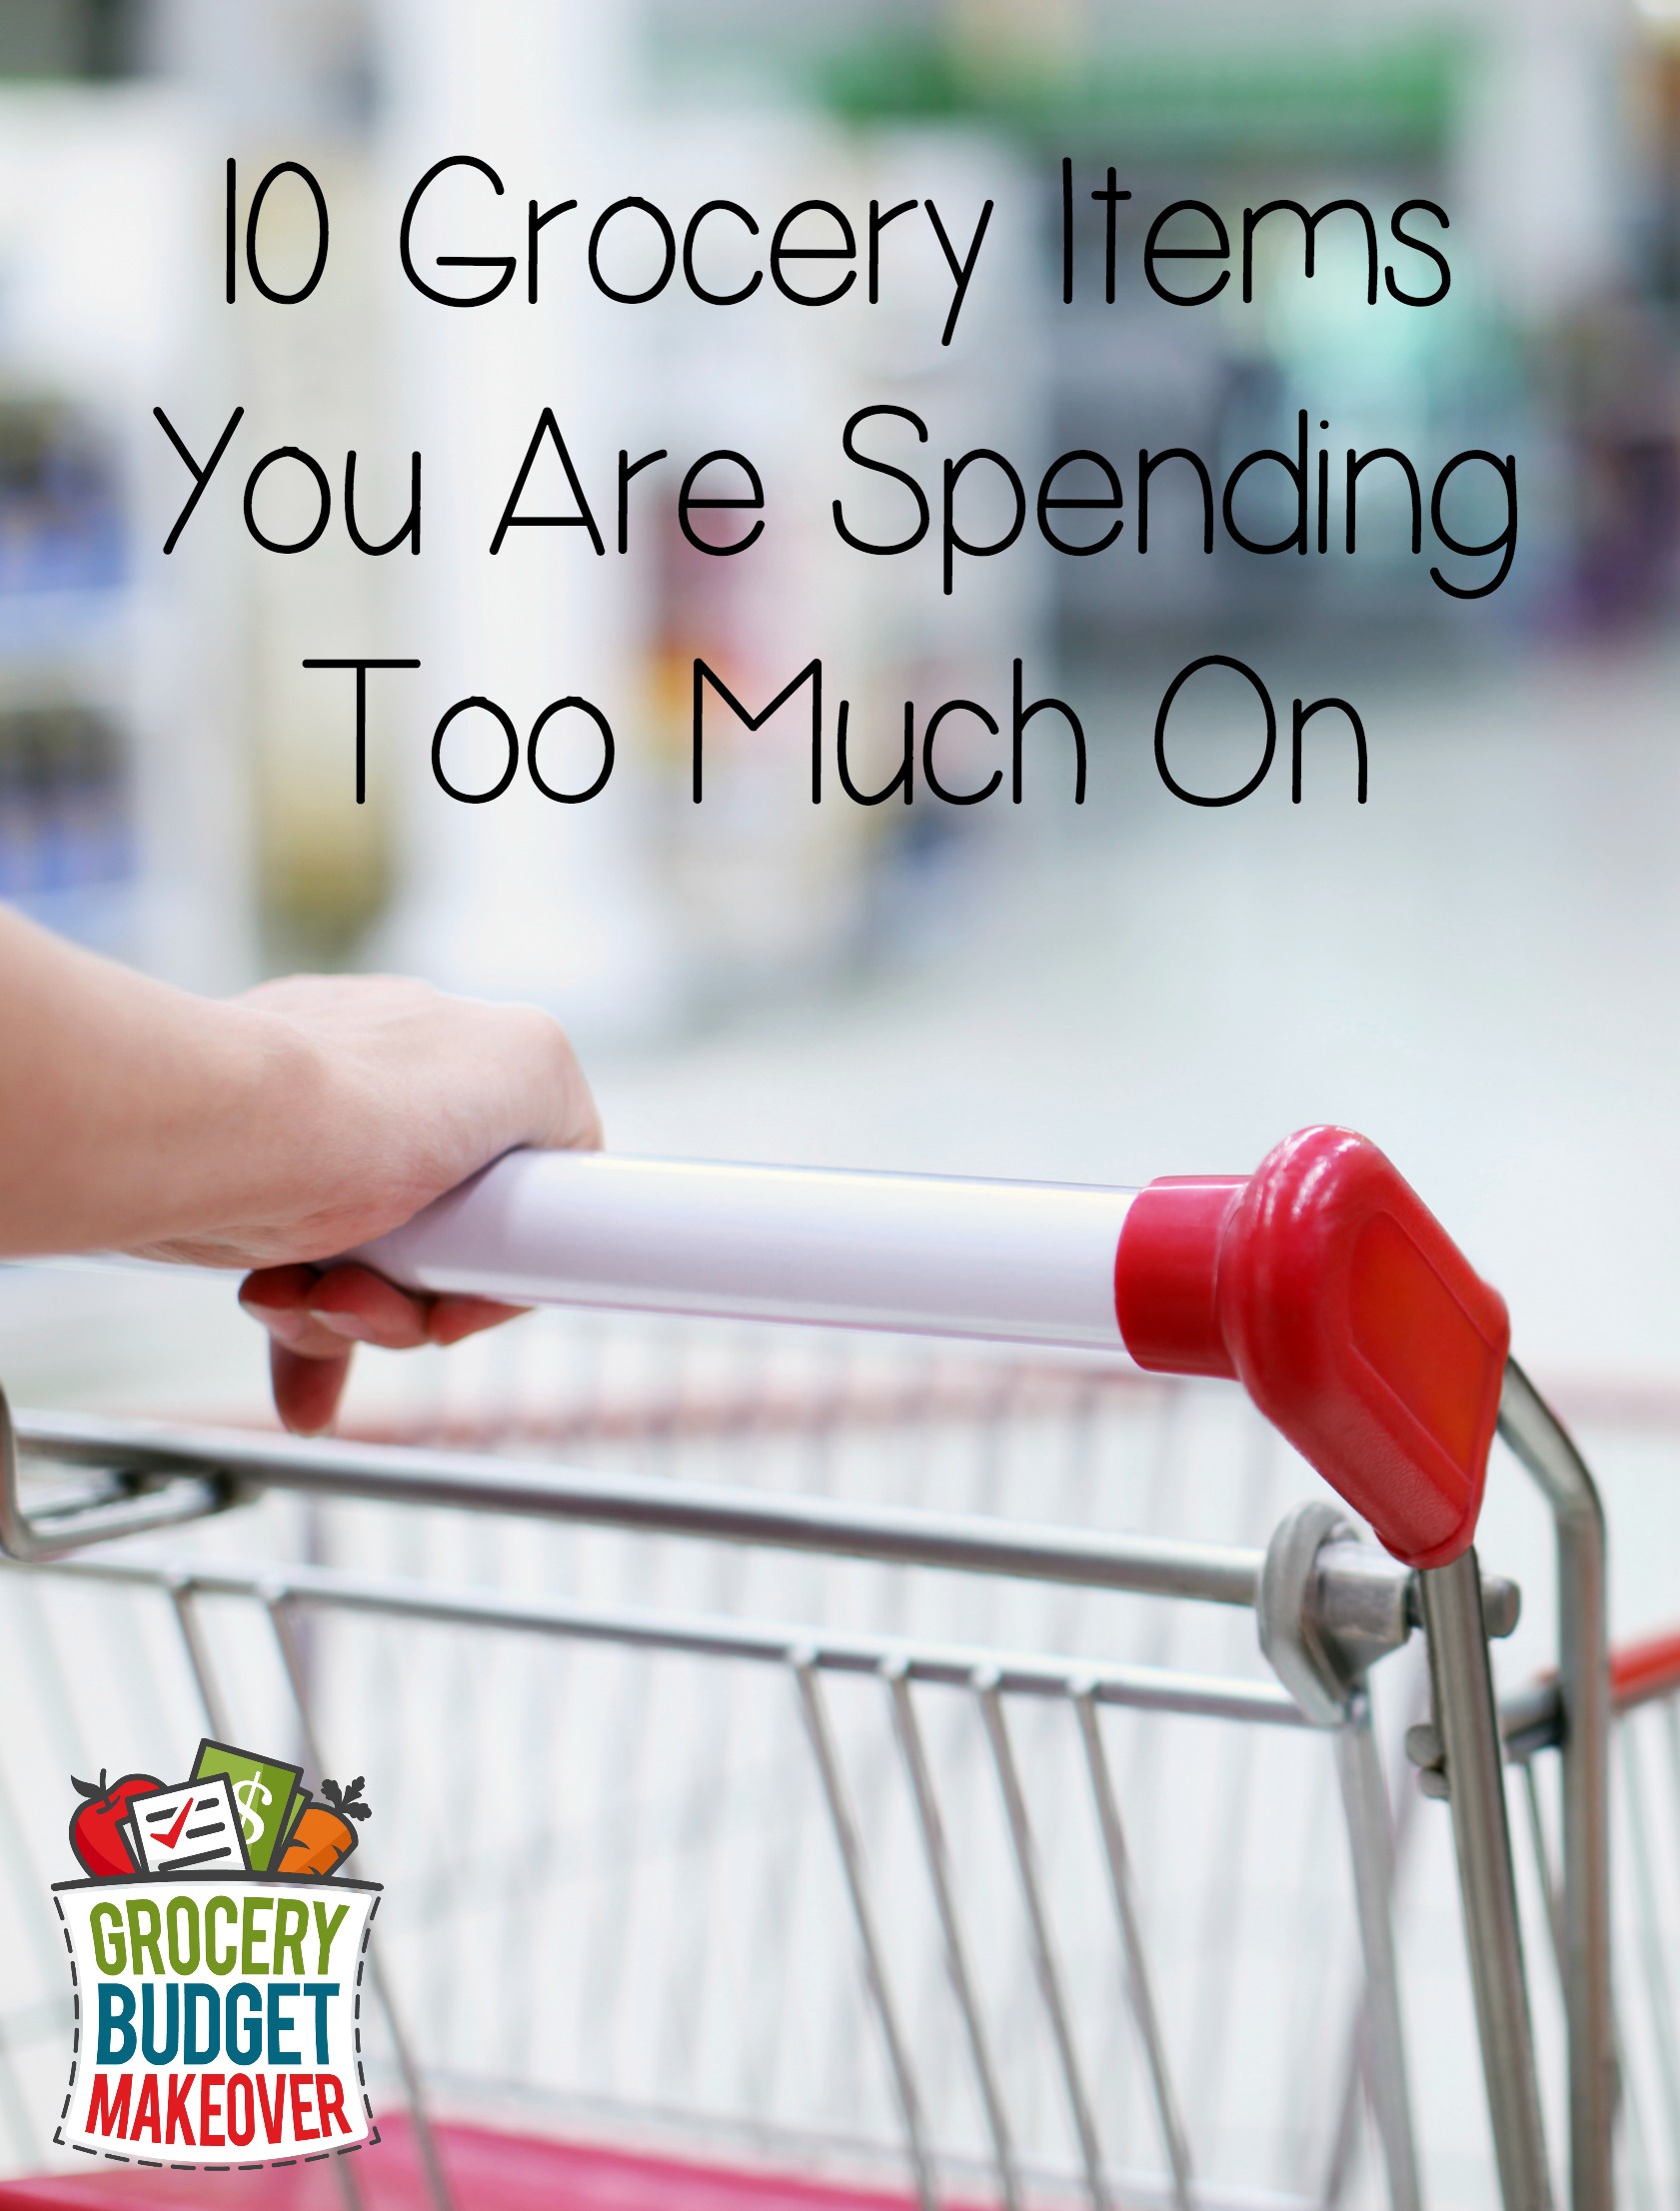 10 Grocery Items Spending Too Much